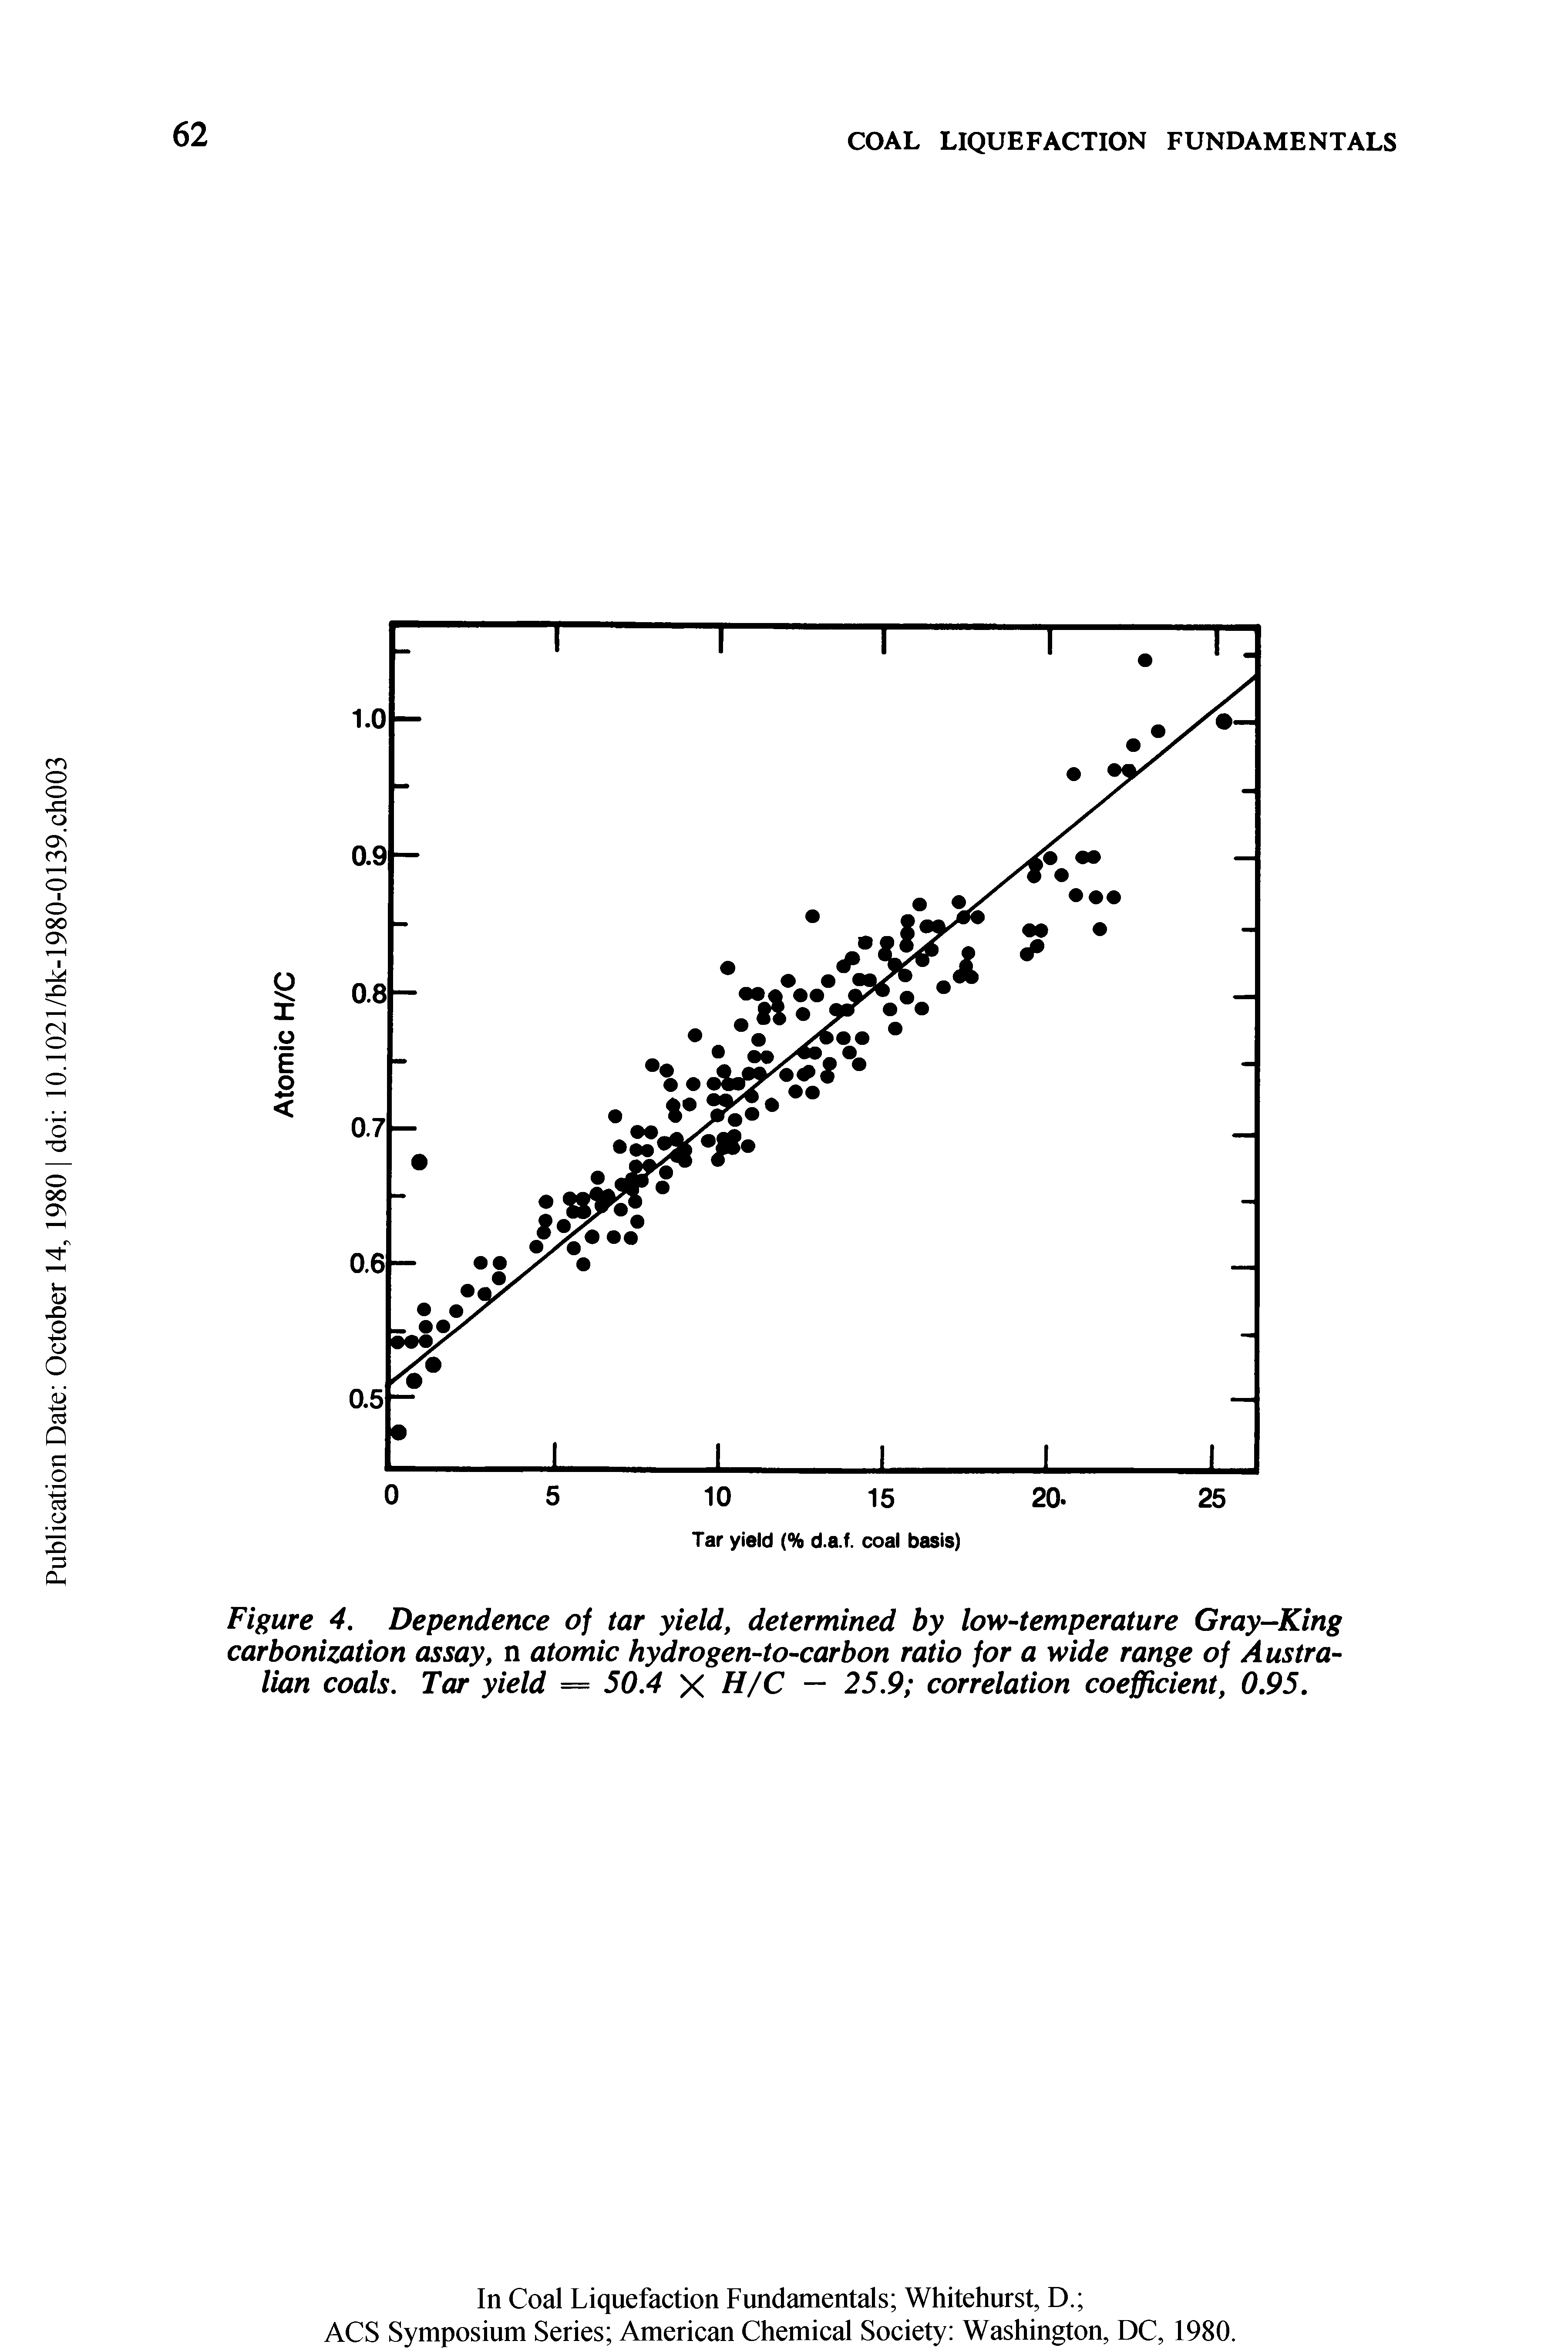 Figure 4. Dependence of tar yield, determined by low-temperature Gray-King carbonization assay, n atomic hydrogen-to-carbon ratio for a wide range of Australian coals. Tar yield = 50.4 X H/C — 25.9 correlation coefficient, 0.95.